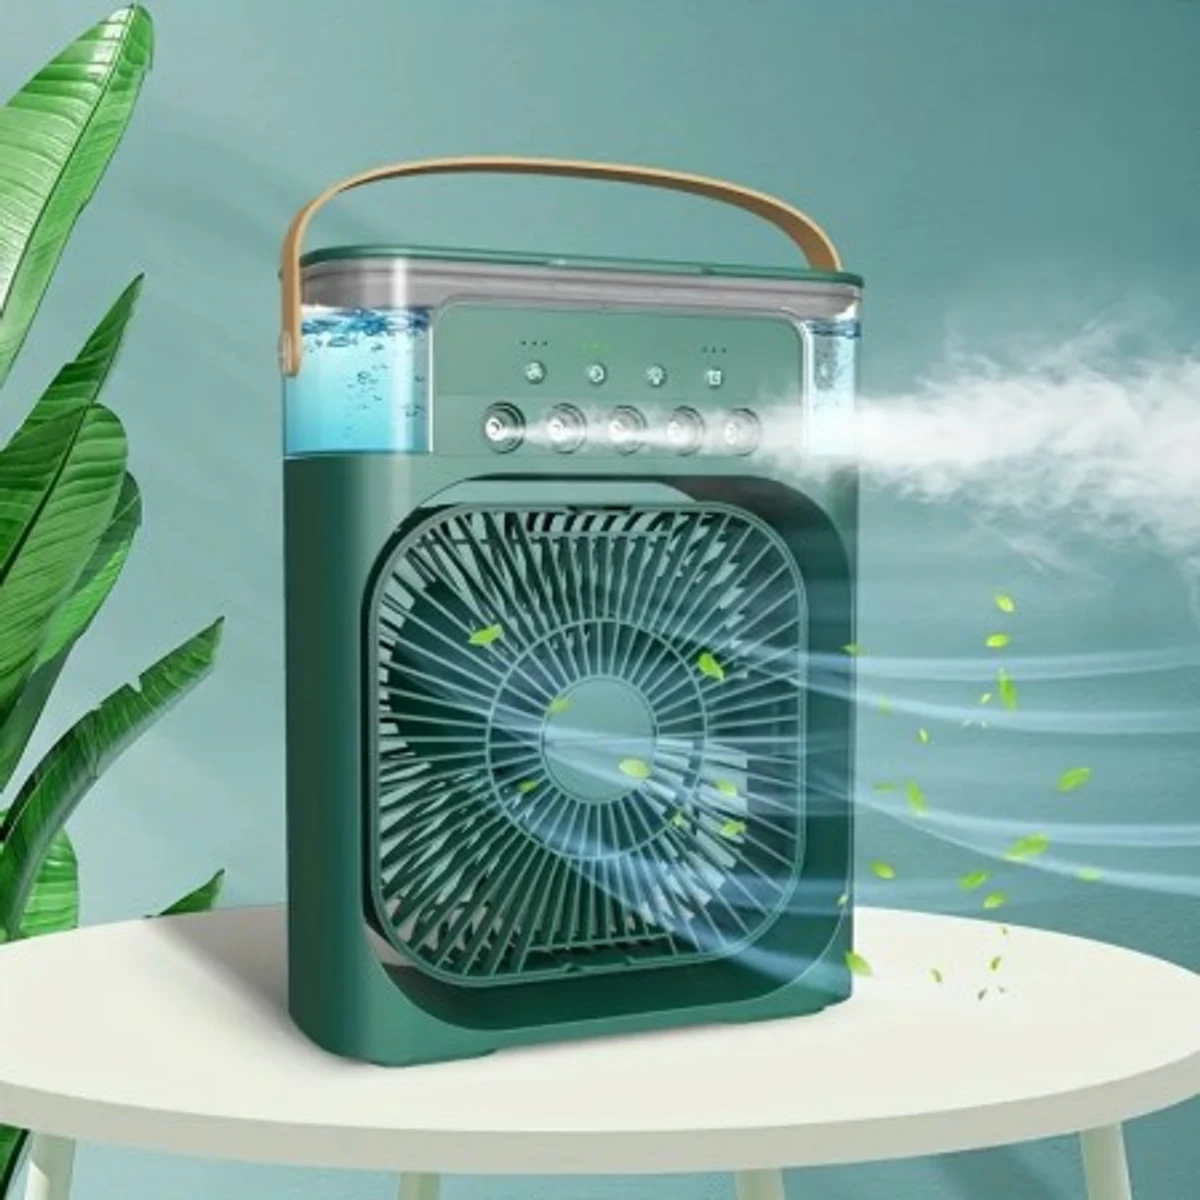 Portable Air Conditioner Fan 500 Ml Water Tank USB Personal Cooler